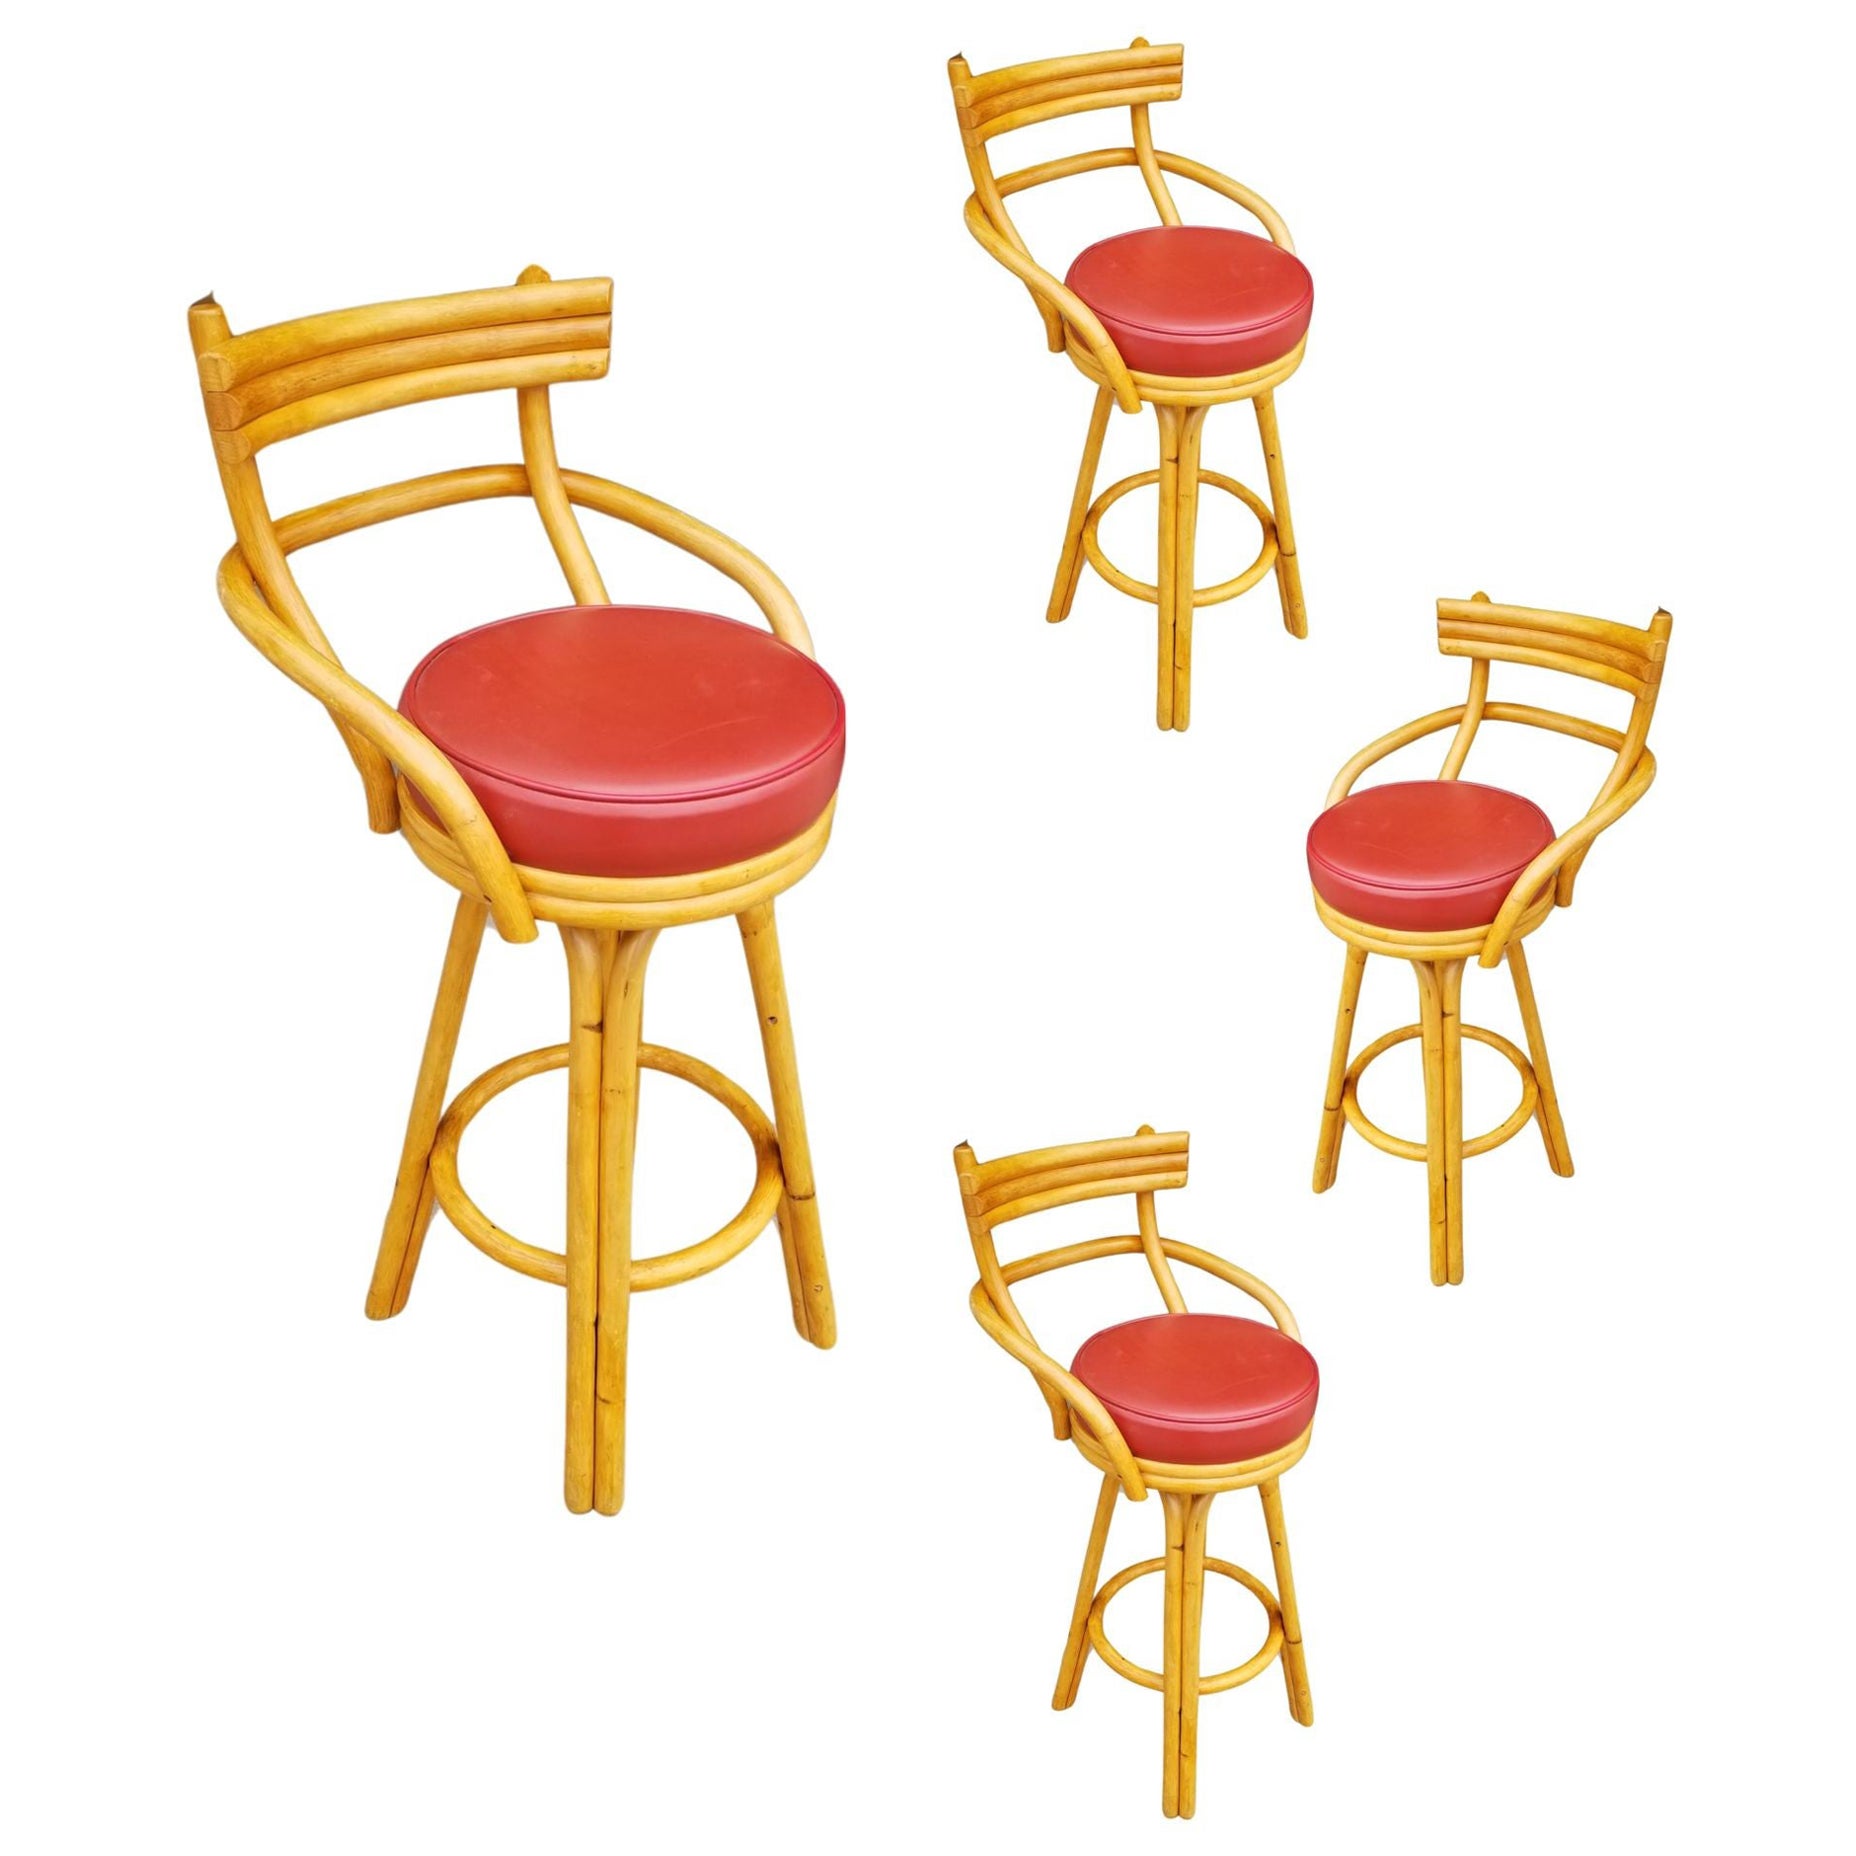 Restored Rattan Stacked Bar stools w/ Red Seat, Set of 4